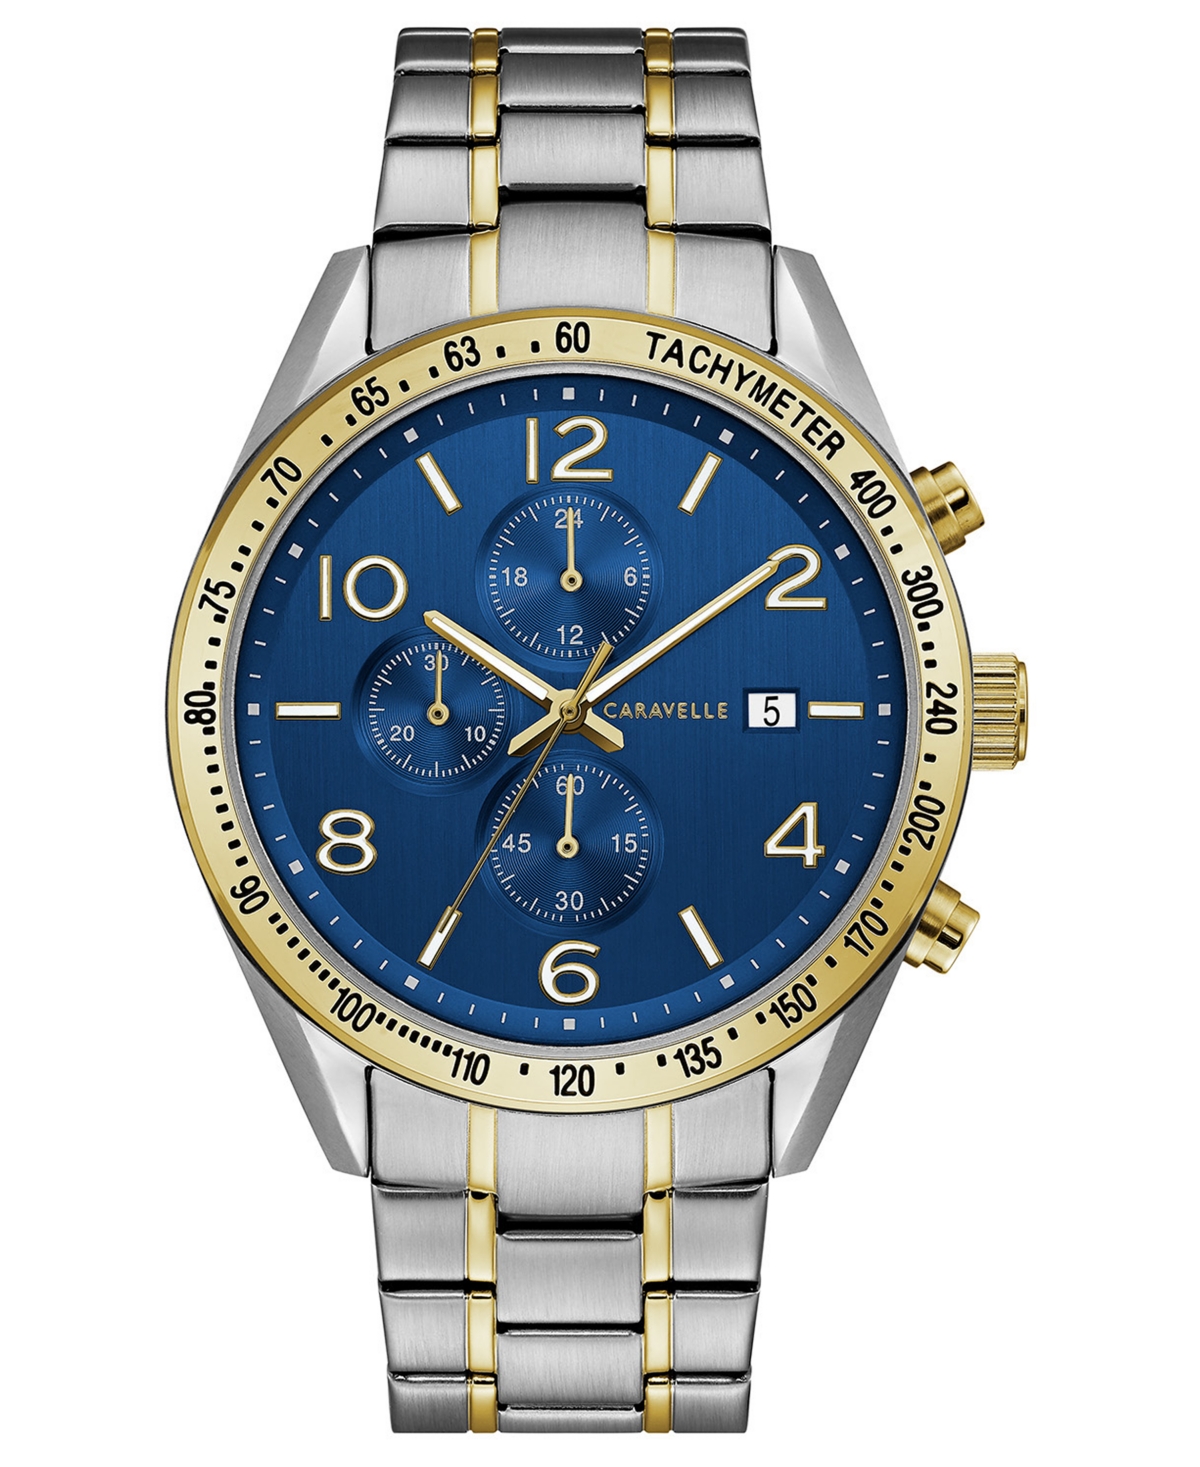 Designed by Bulova Men's Chronograph Two-Tone Stainless Steel Bracelet Watch 44mm - Two-Tone